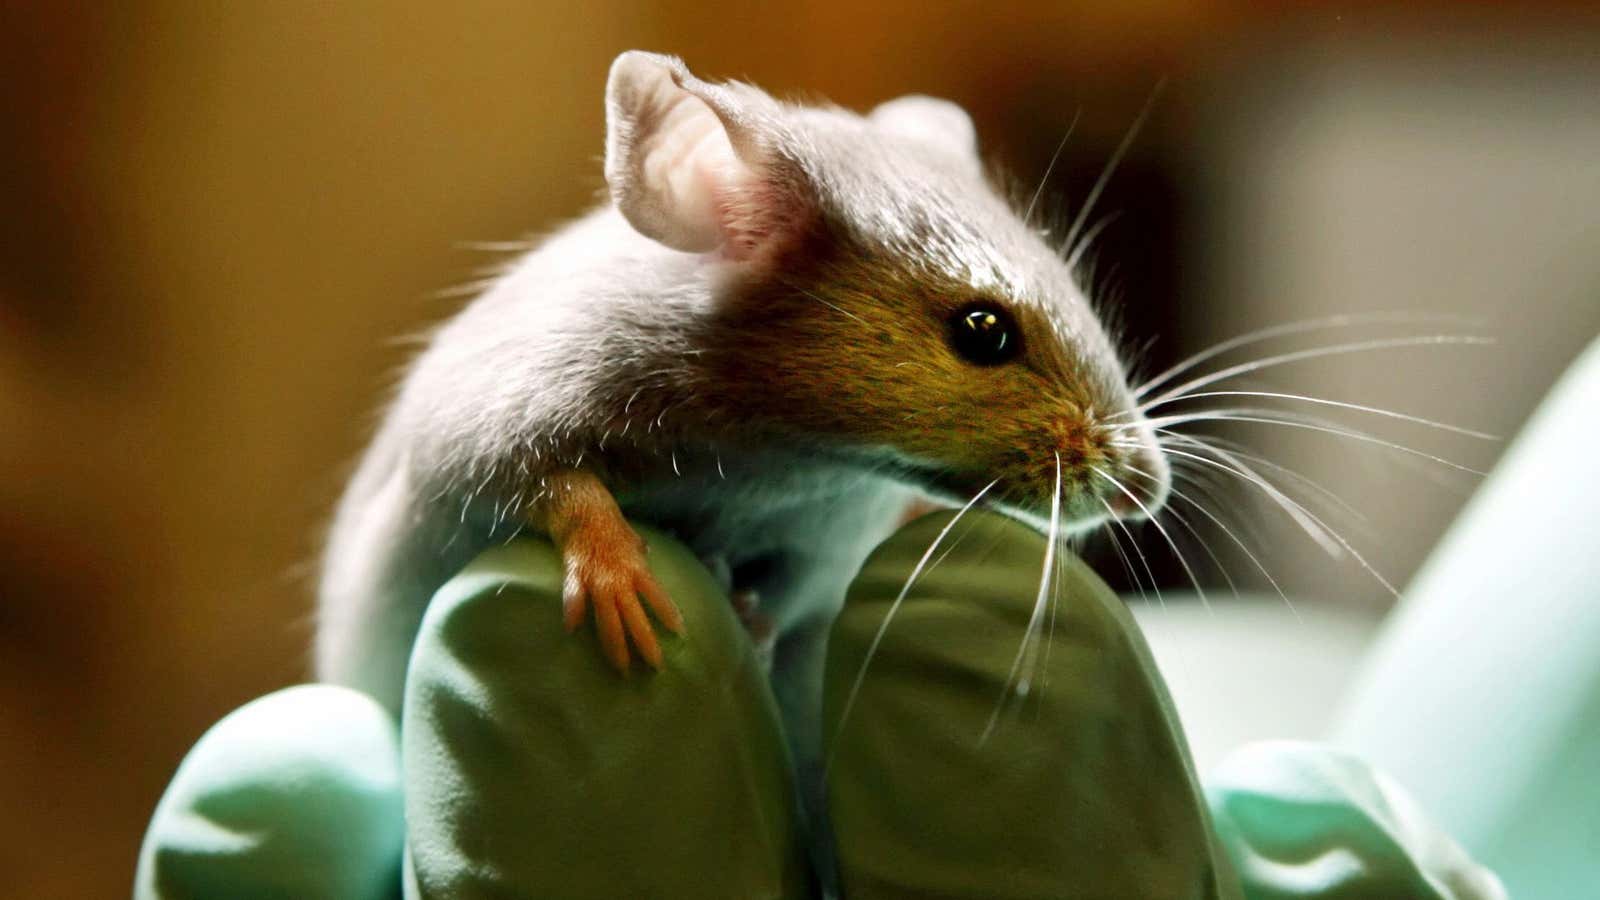 Space-bound mice need non-moldy food.